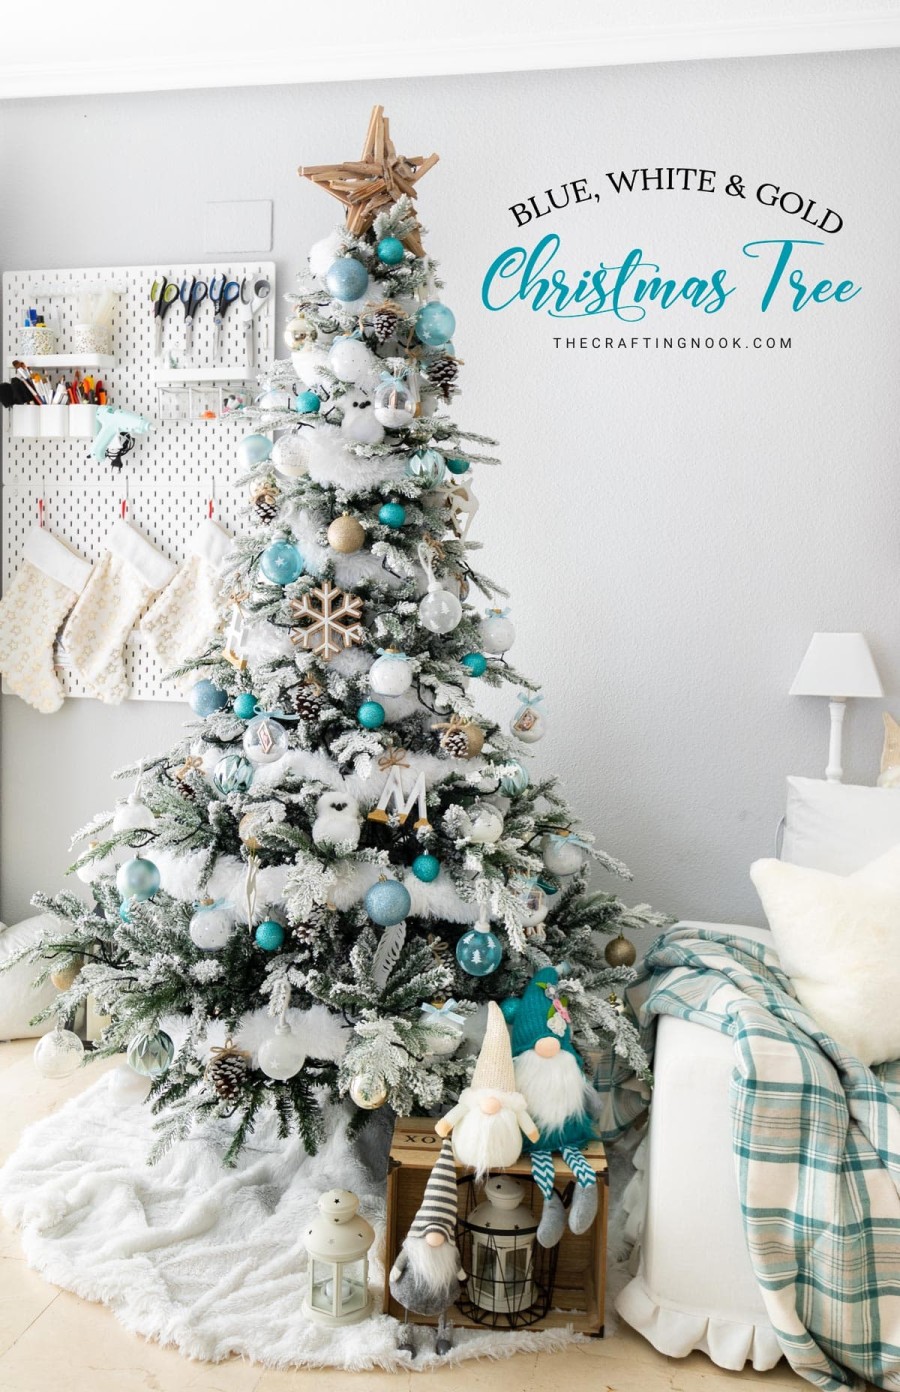 White, Blue and Gold Christmas Tree Decor  - The Crafting Nook